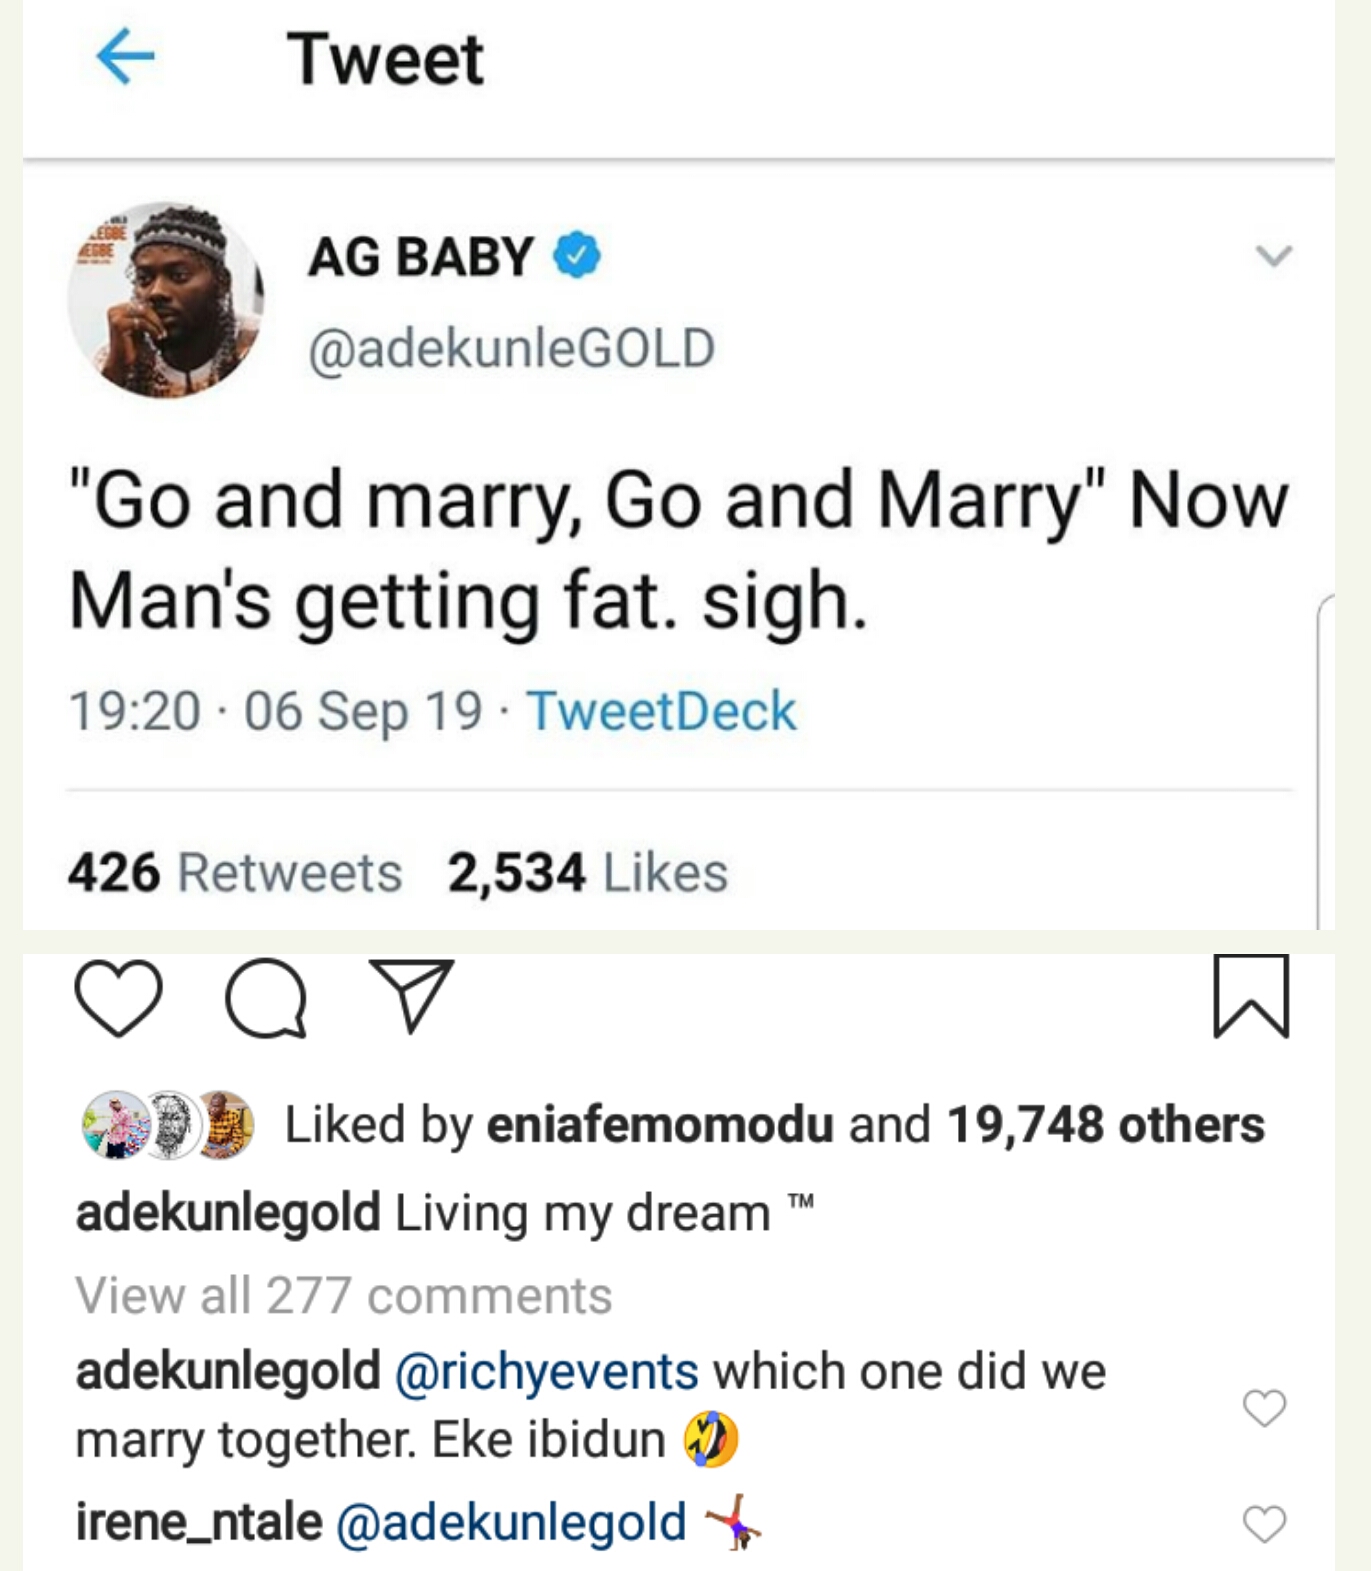 Adekunle Gold complains of gaining weight after getting married